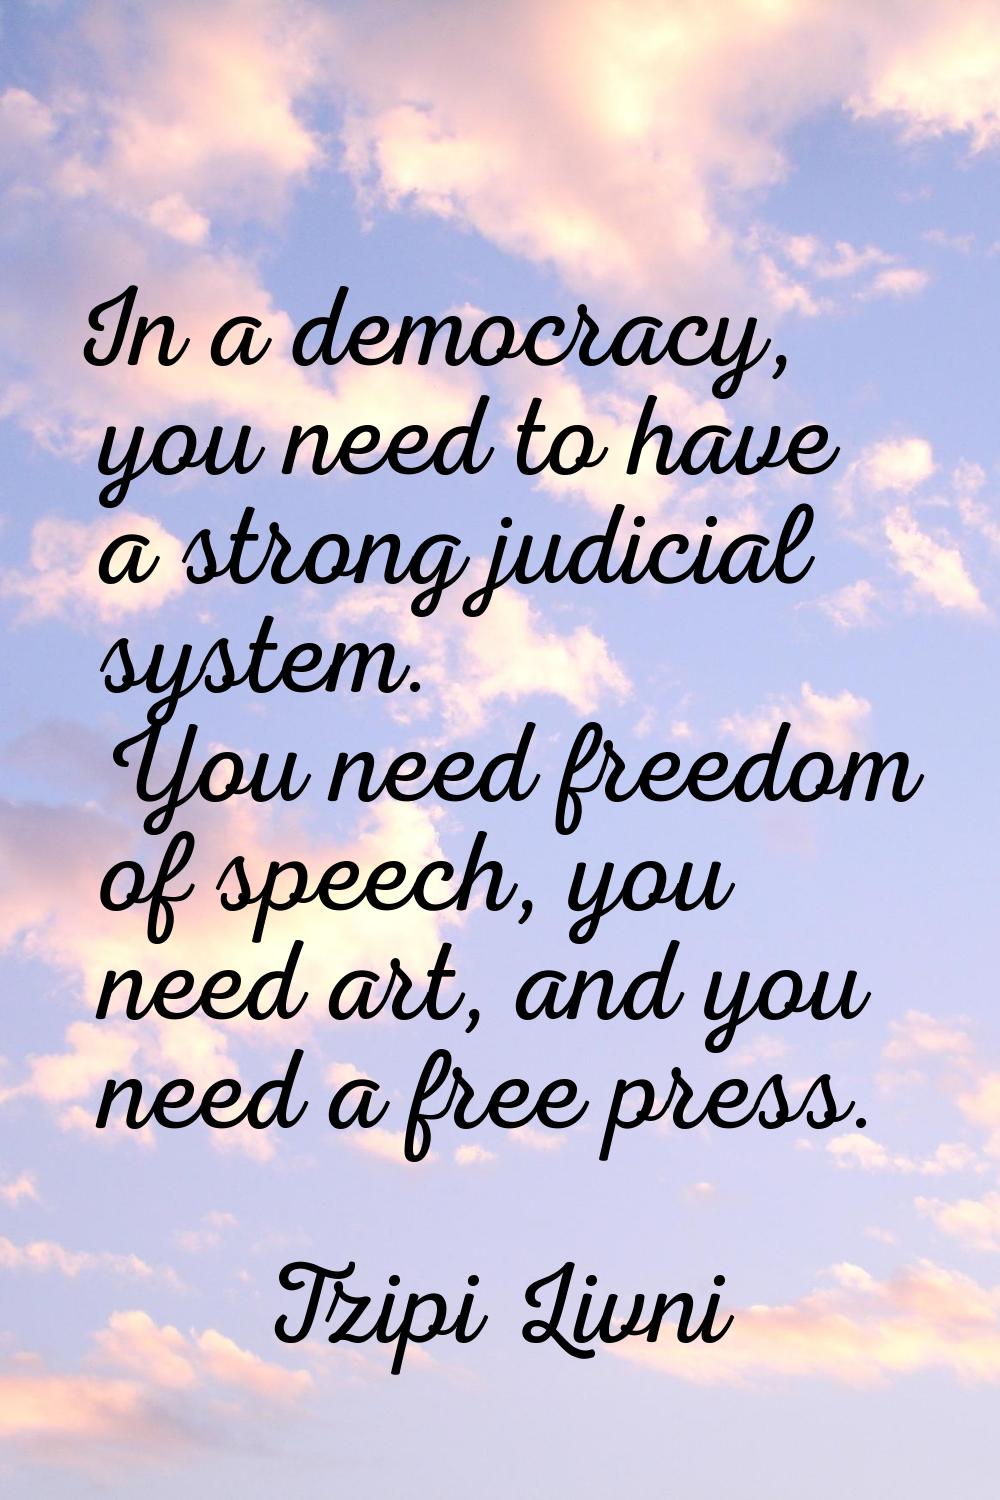 In a democracy, you need to have a strong judicial system. You need freedom of speech, you need art